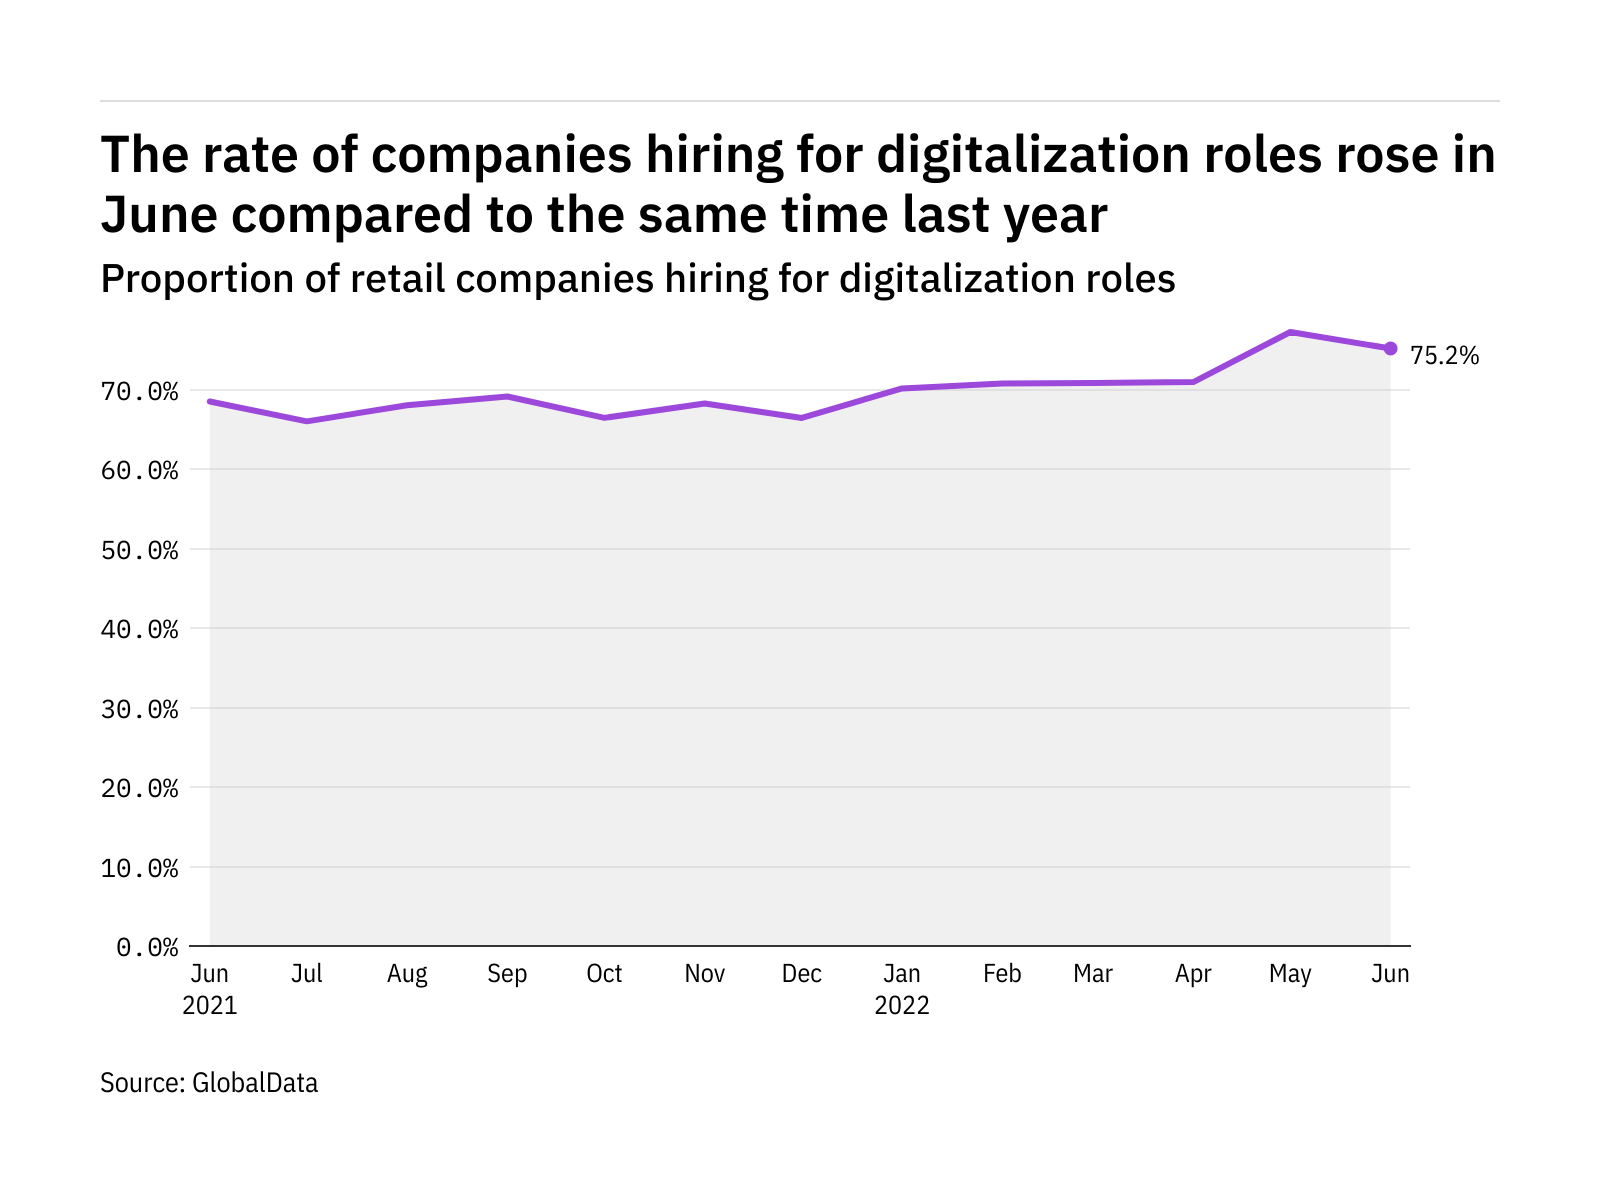 Digitalization hiring levels in the retail industry rose in June 2022